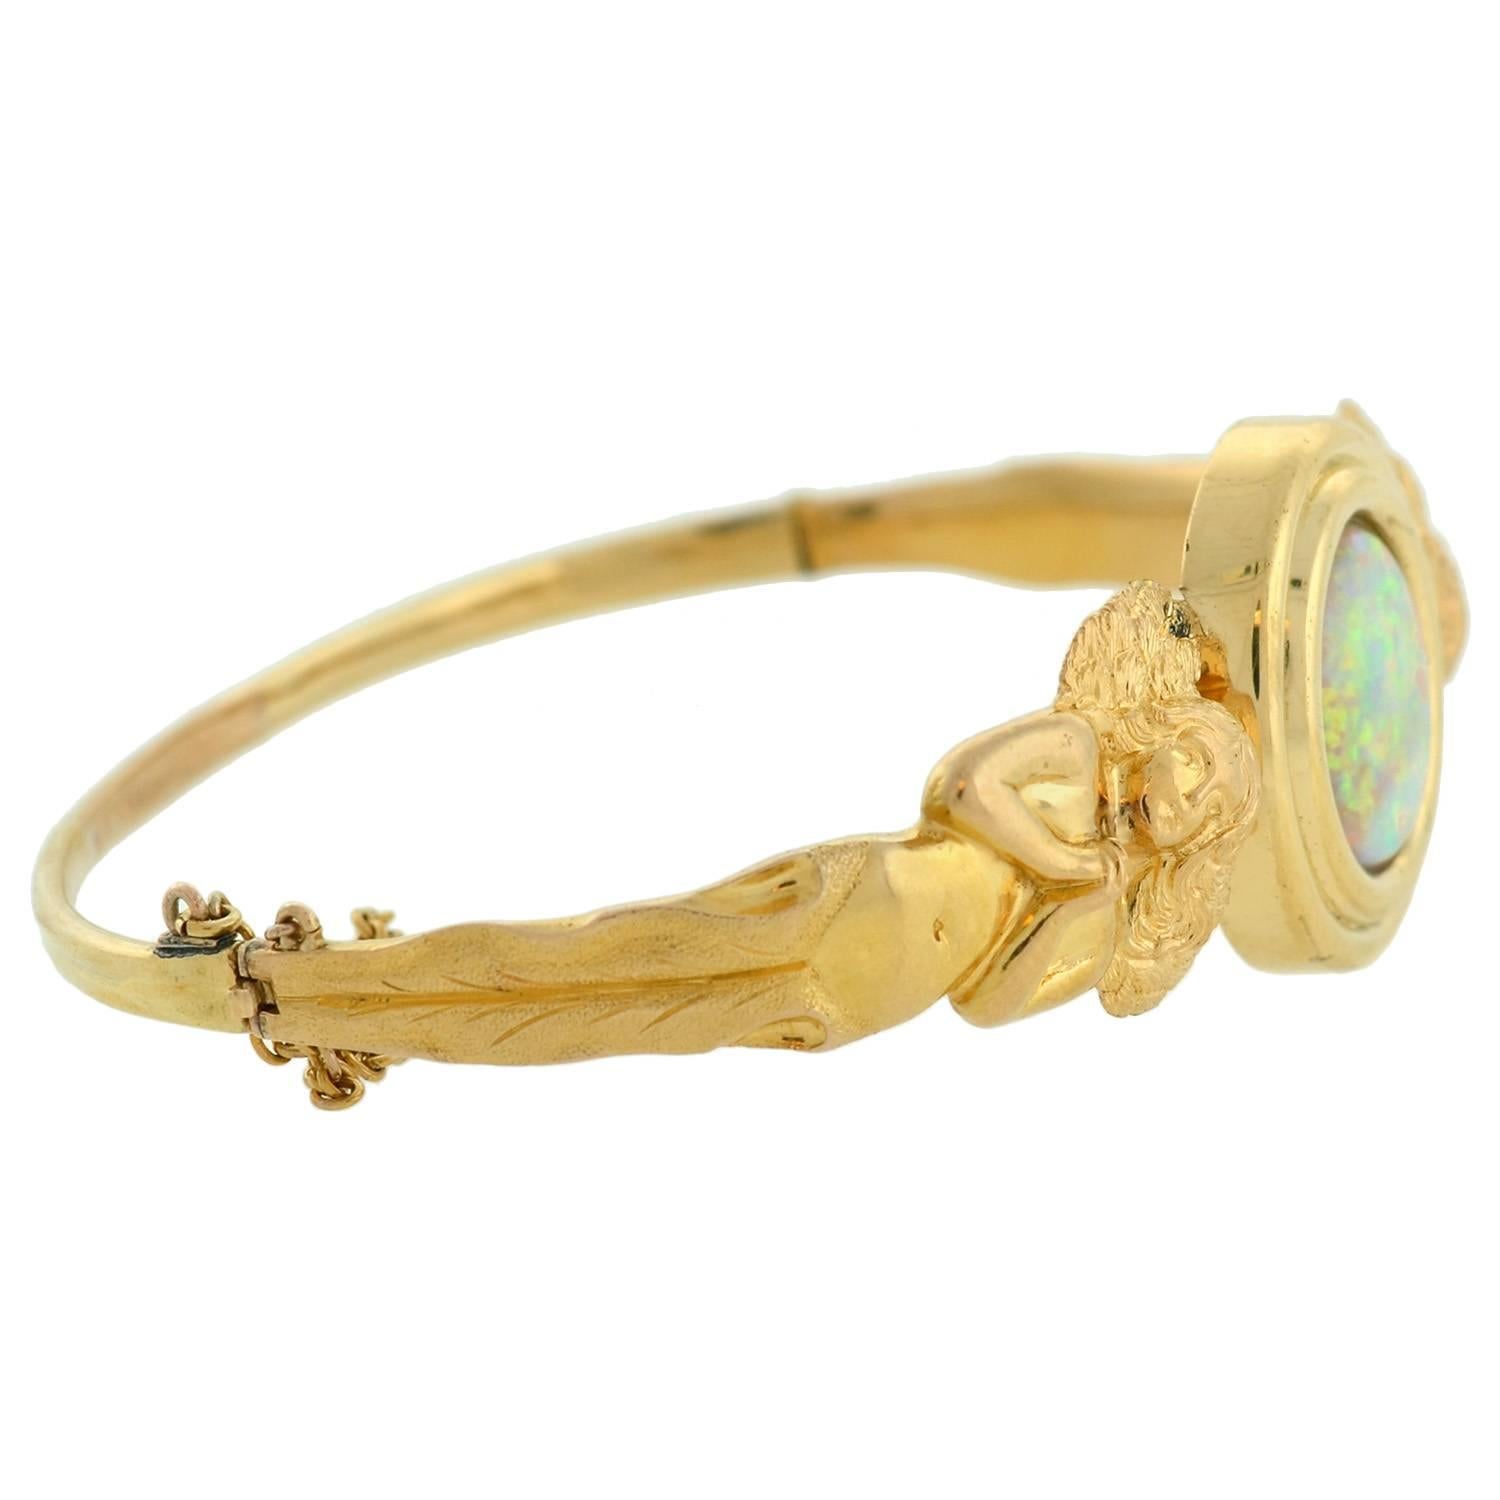 A beautiful and unusual opal bracelet from the 1900s! Made of 18kt yellow gold, this gorgeous piece carries a wonderful and romantic angelic design. Set in the belly front of the bracelet is a vivid opal stone which is oval shaped and substantial in